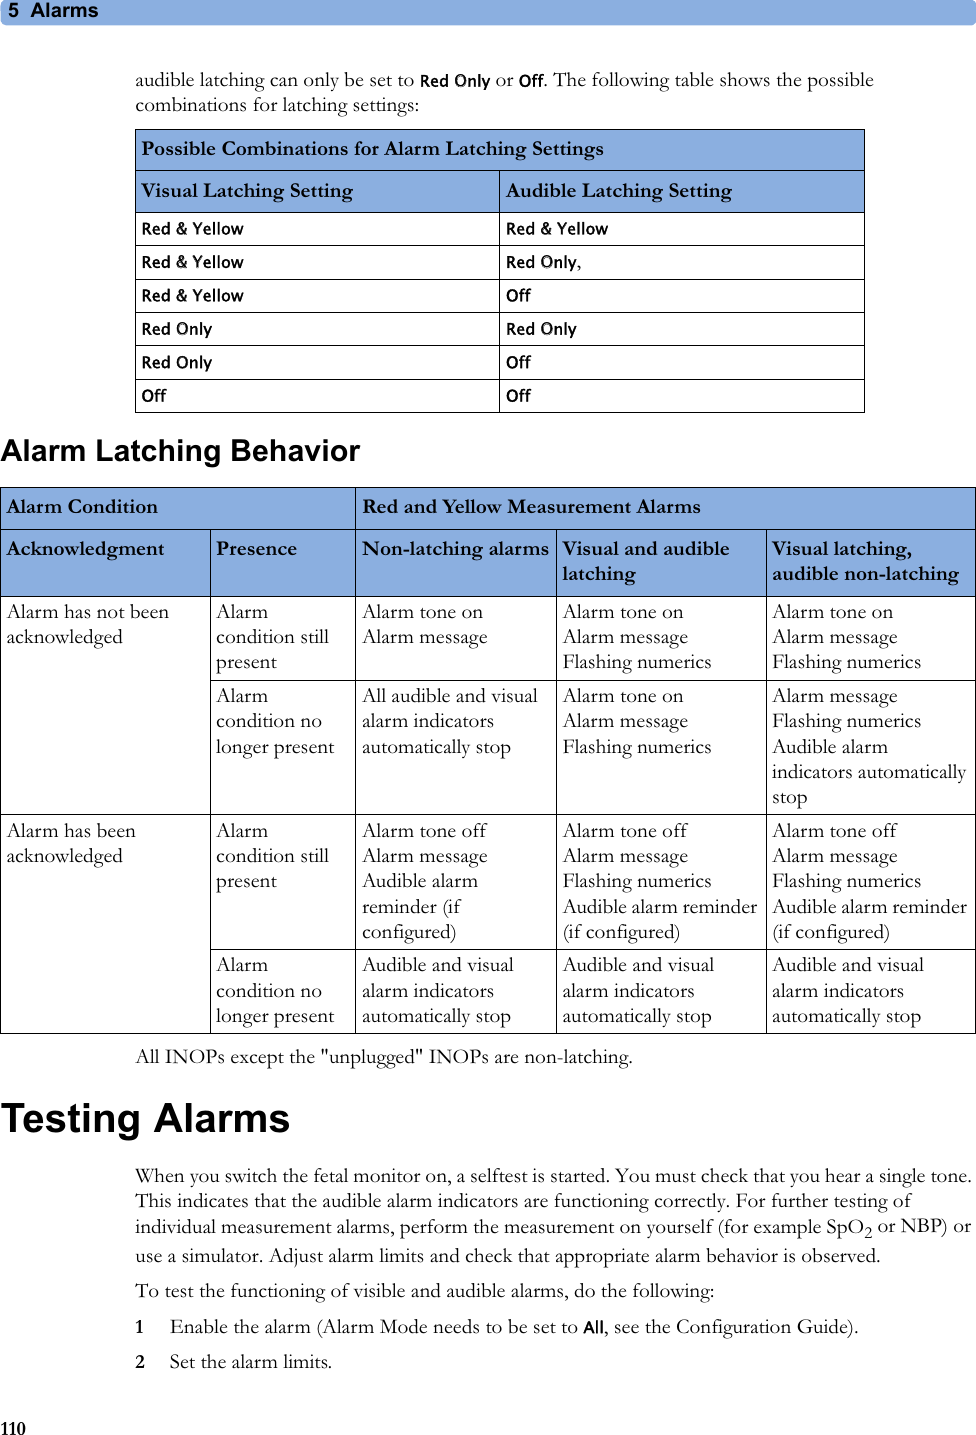 5  Alarms110audible latching can only be set to Red Only or Off. The following table shows the possible combinations for latching settings:Alarm Latching BehaviorAll INOPs except the &quot;unplugged&quot; INOPs are non-latching.Testing AlarmsWhen you switch the fetal monitor on, a selftest is started. You must check that you hear a single tone. This indicates that the audible alarm indicators are functioning correctly. For further testing of individual measurement alarms, perform the measurement on yourself (for example SpO2 or NBP) or use a simulator. Adjust alarm limits and check that appropriate alarm behavior is observed.To test the functioning of visible and audible alarms, do the following:1Enable the alarm (Alarm Mode needs to be set to All, see the Configuration Guide).2Set the alarm limits.Possible Combinations for Alarm Latching SettingsVisual Latching Setting Audible Latching SettingRed &amp; Yellow Red &amp; YellowRed &amp; Yellow Red Only,Red &amp; Yellow OffRed Only Red OnlyRed Only OffOff OffAlarm Condition Red and Yellow Measurement AlarmsAcknowledgment Presence Non-latching alarms Visual and audible latchingVisual latching, audible non-latchingAlarm has not been acknowledgedAlarm condition still presentAlarm tone on Alarm messageAlarm tone on Alarm message Flashing numericsAlarm tone on Alarm message Flashing numericsAlarm condition no longer presentAll audible and visual alarm indicators automatically stopAlarm tone on Alarm message Flashing numericsAlarm message Flashing numerics Audible alarm indicators automatically stopAlarm has been acknowledgedAlarm condition still presentAlarm tone off Alarm message  Audible alarm reminder (if configured)Alarm tone off  Alarm message  Flashing numerics  Audible alarm reminder (if configured)Alarm tone off  Alarm message Flashing numerics Audible alarm reminder (if configured)Alarm condition no longer presentAudible and visual alarm indicators automatically stopAudible and visual alarm indicators automatically stopAudible and visual alarm indicators automatically stop